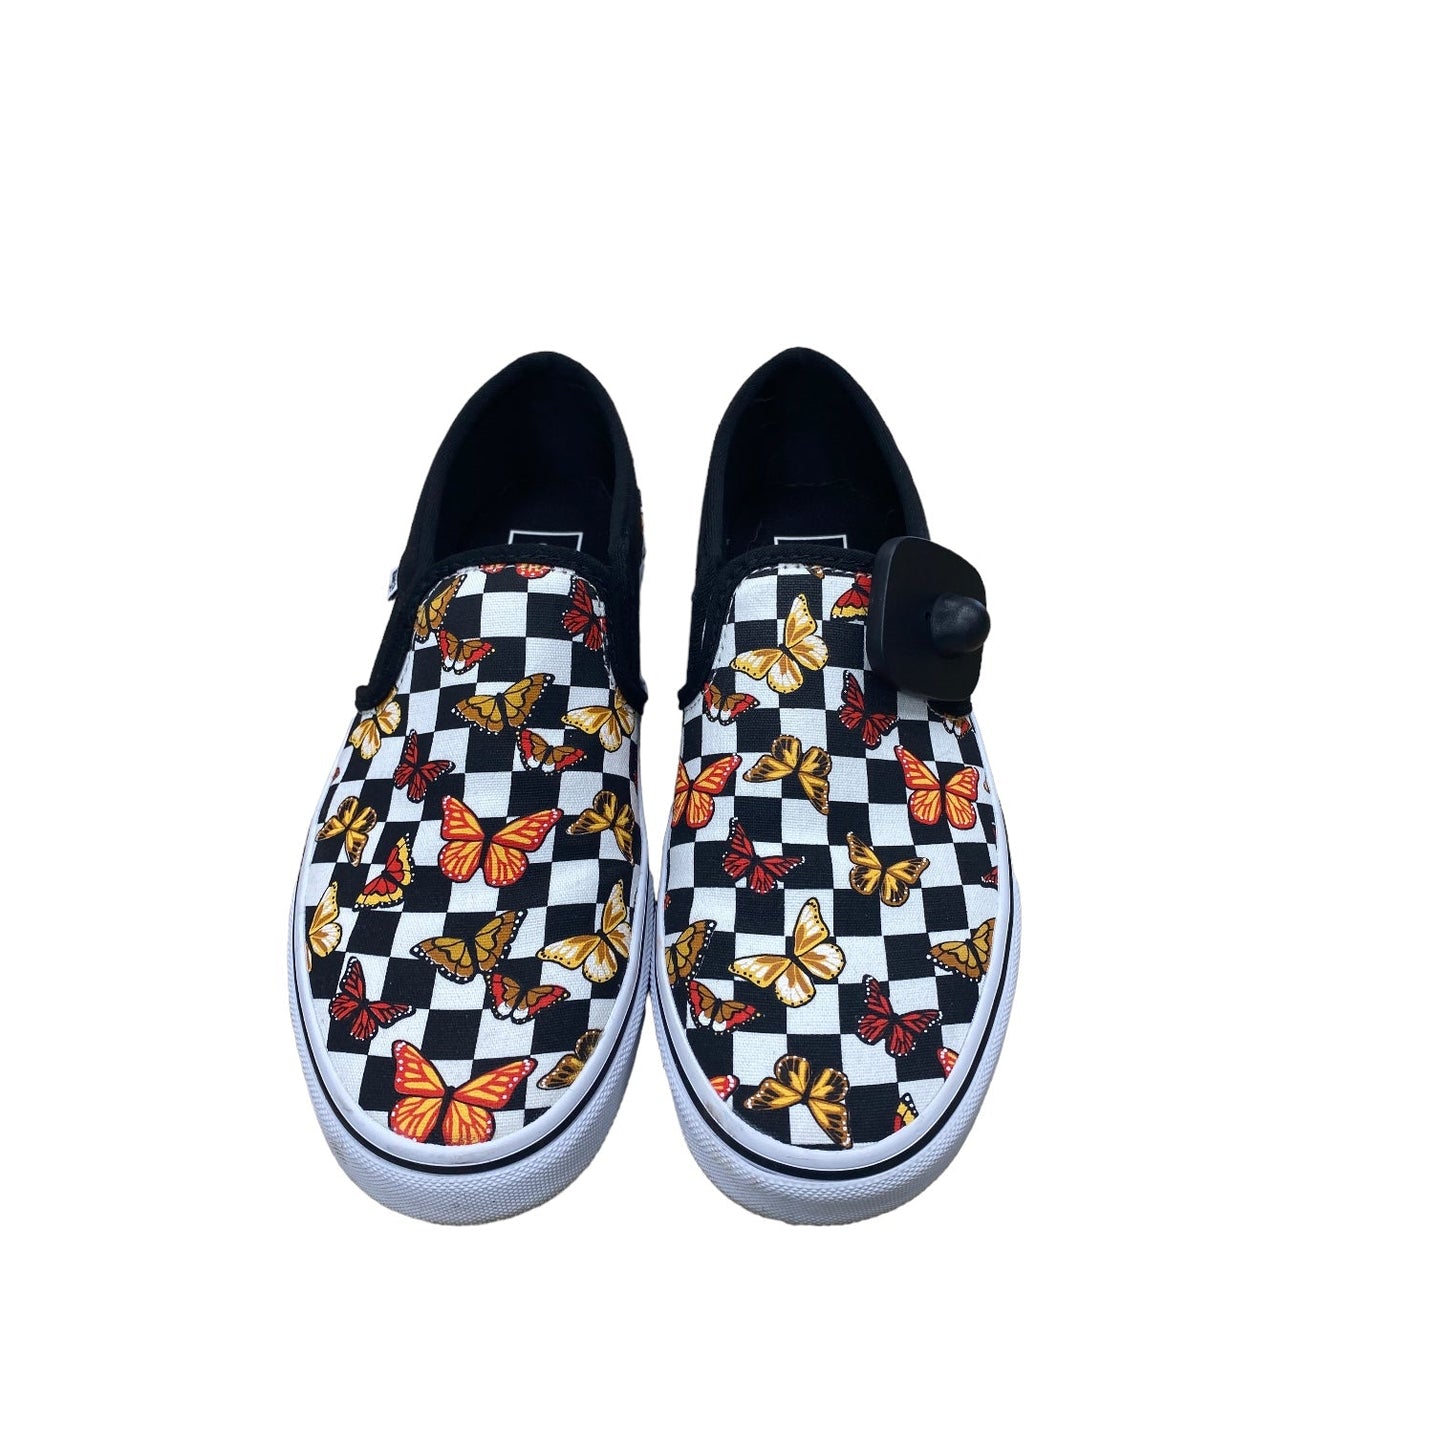 Checkered Pattern Shoes Sneakers Vans, Size 8